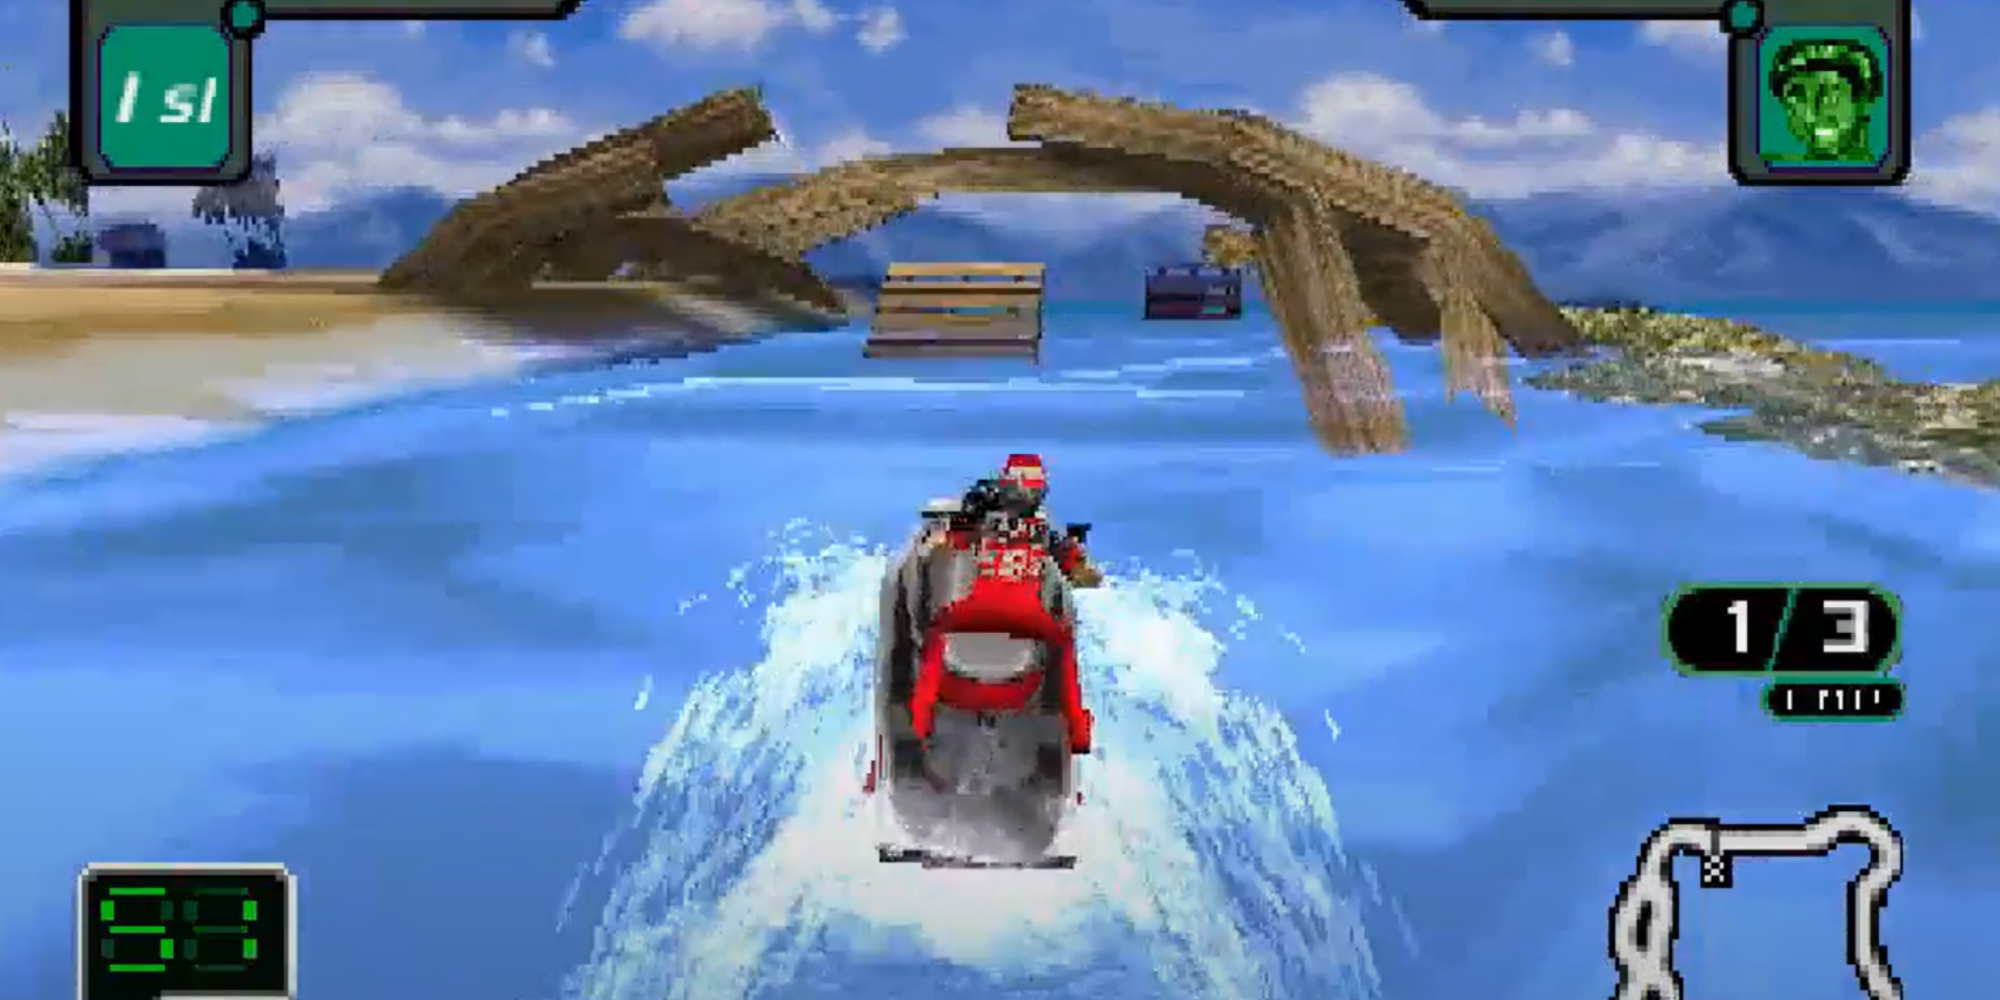 sea-doo hydrocross ps1 showing a jetski racing near a wooden structure